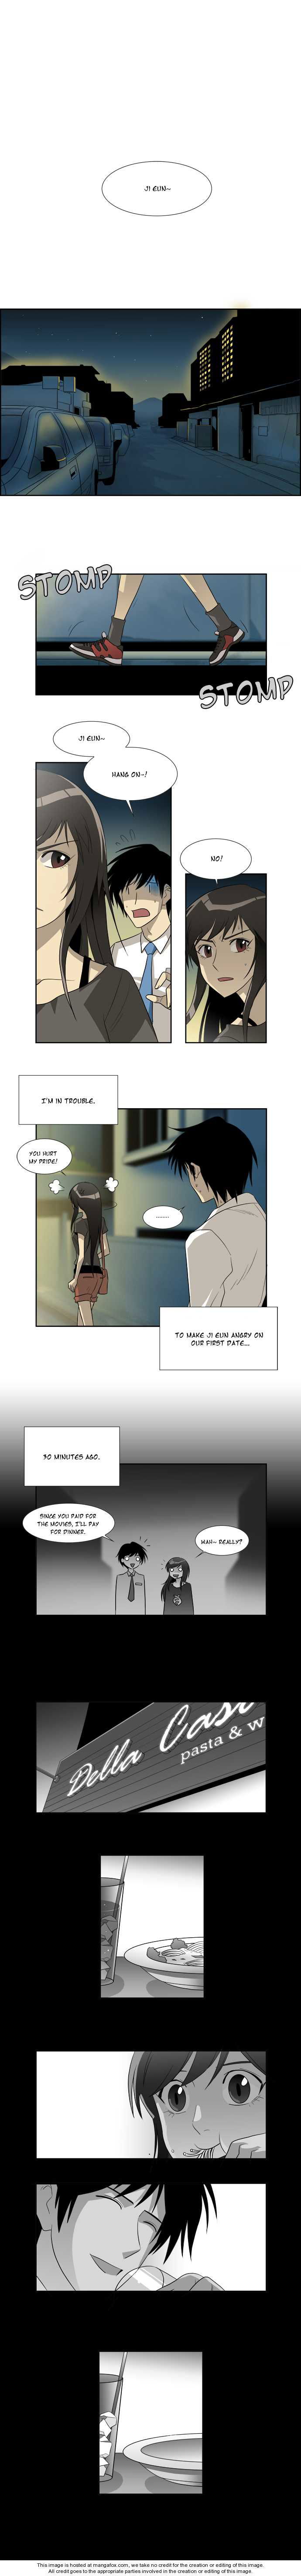 Melo Holic Chapter 017 page 2